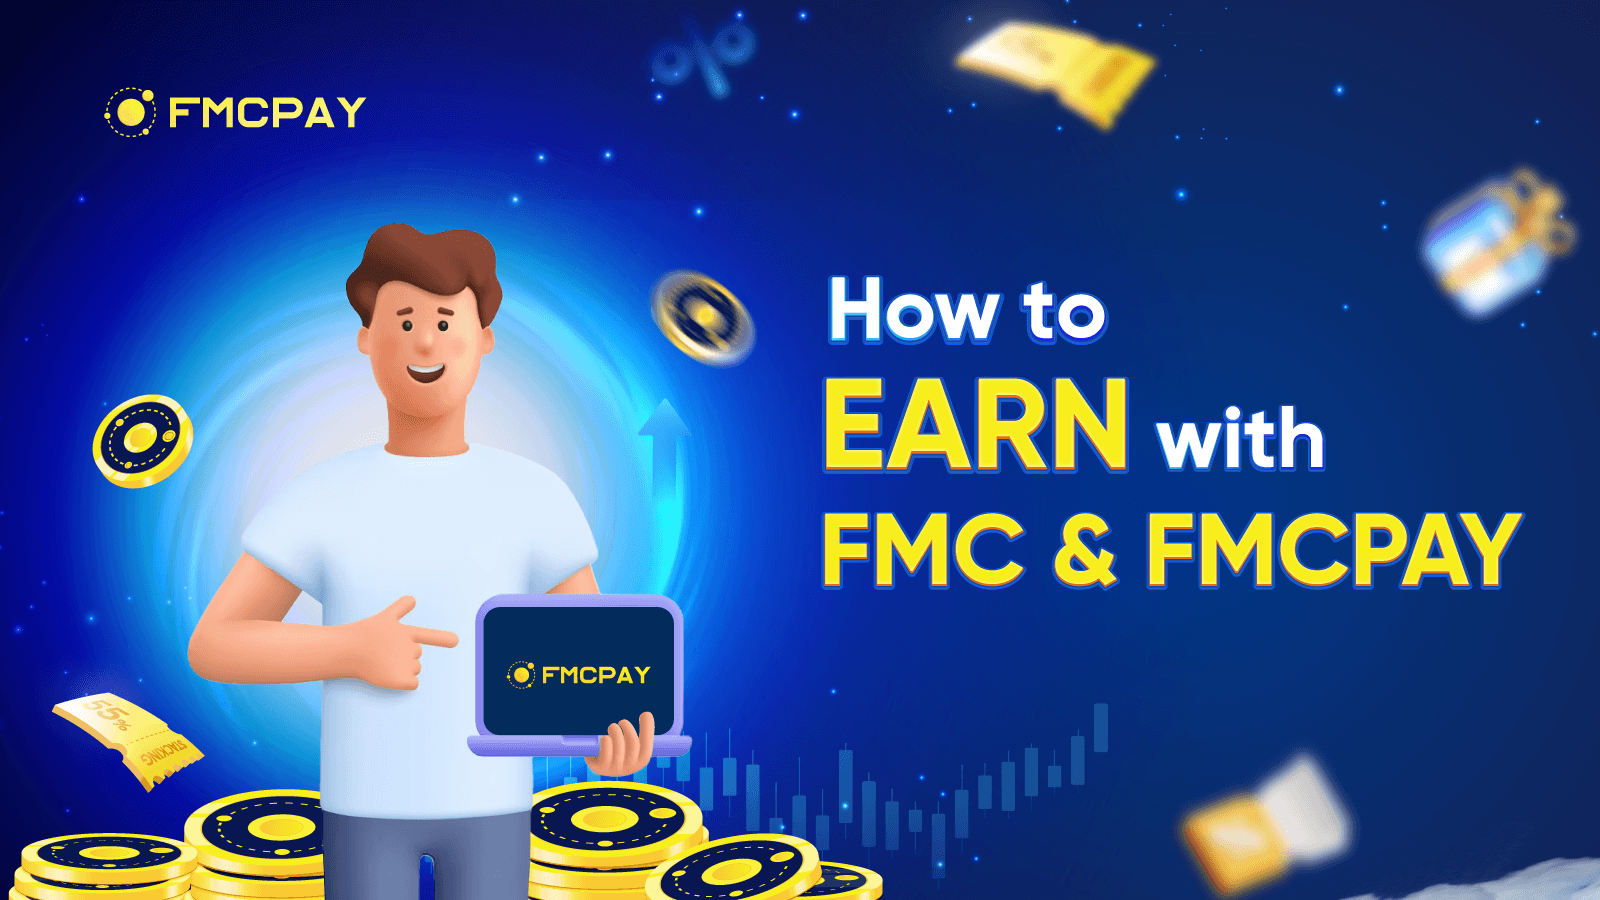 How to earn with FMC FMCPAY